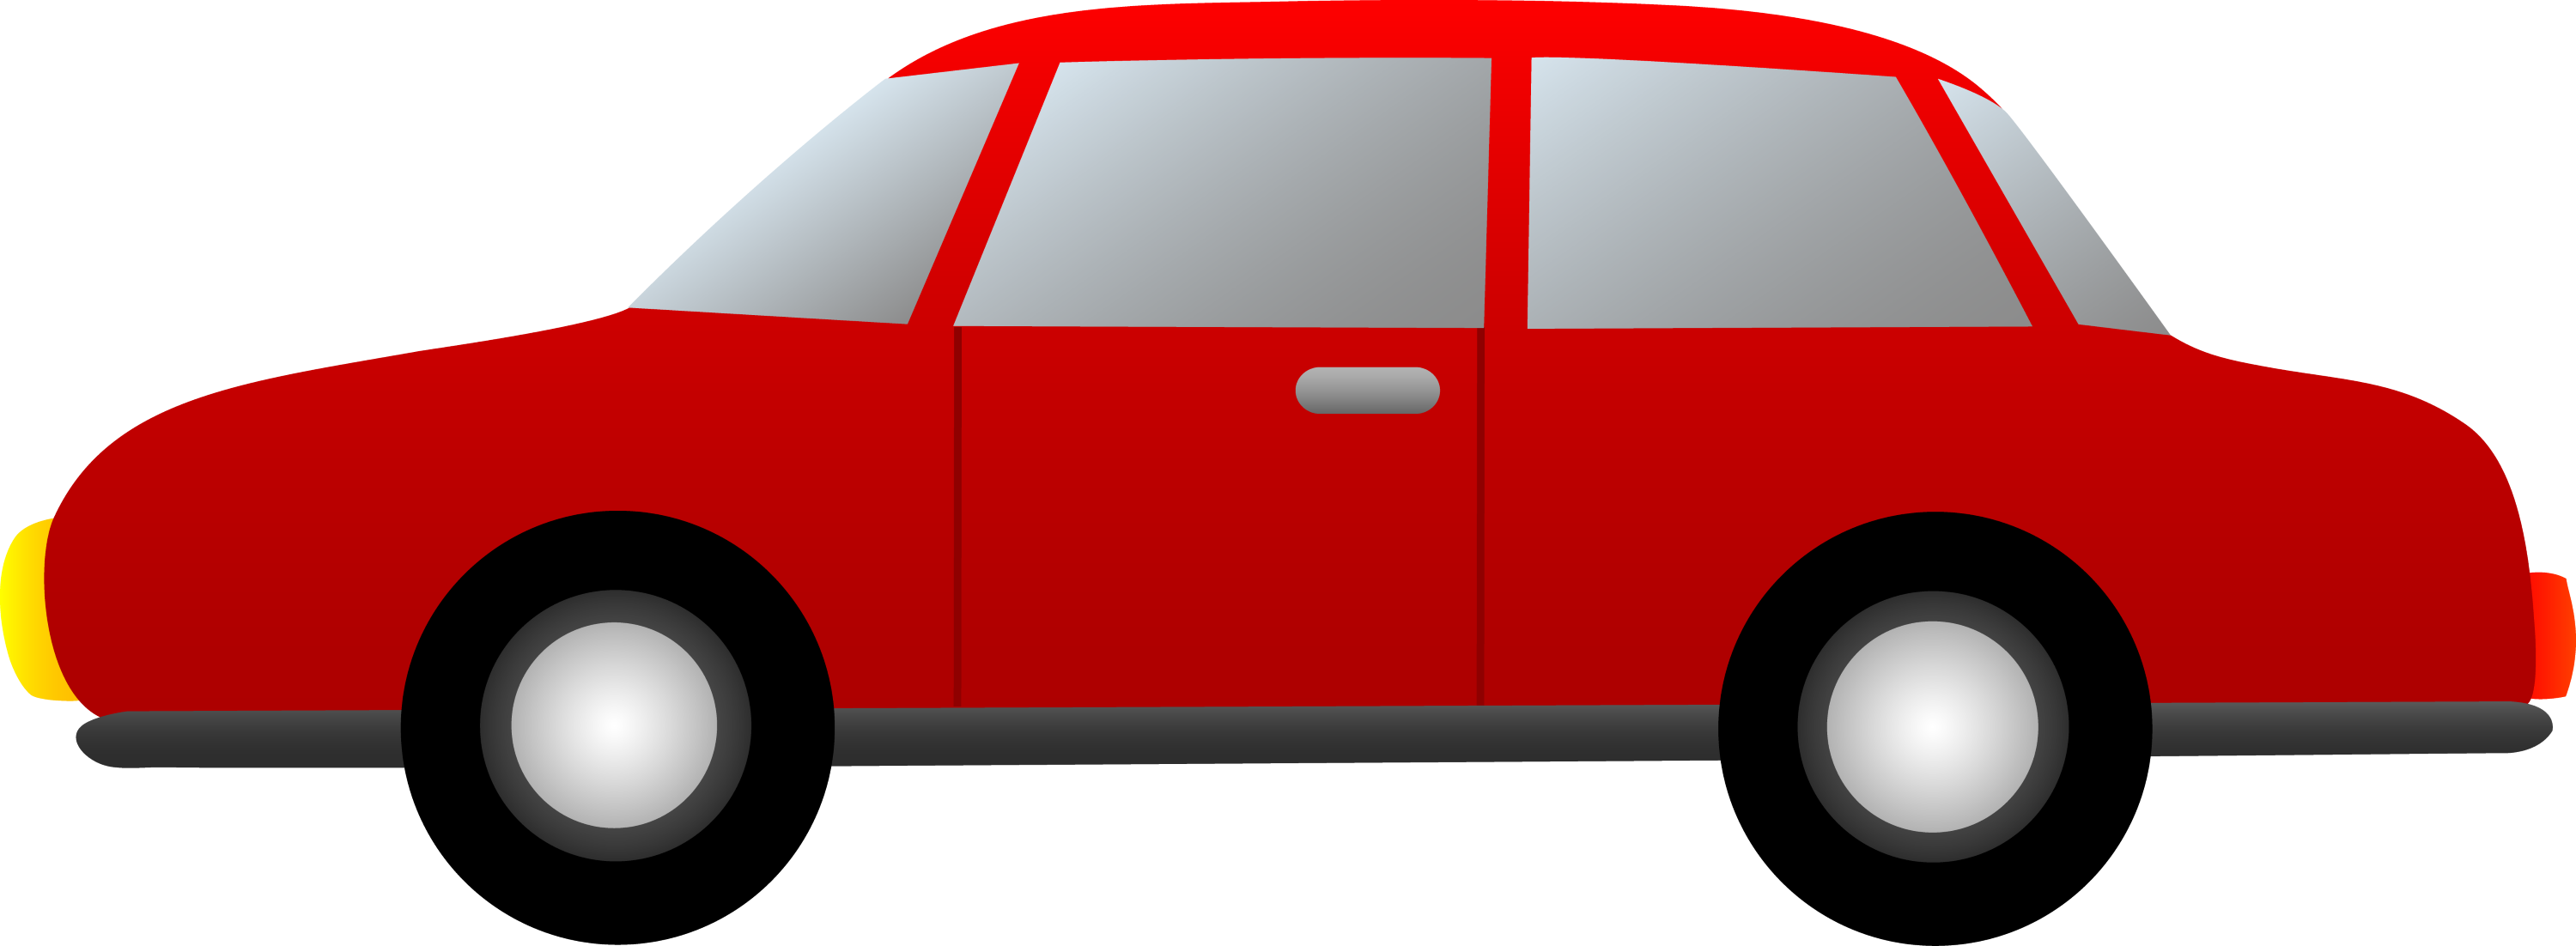 clipart cars free - photo #33